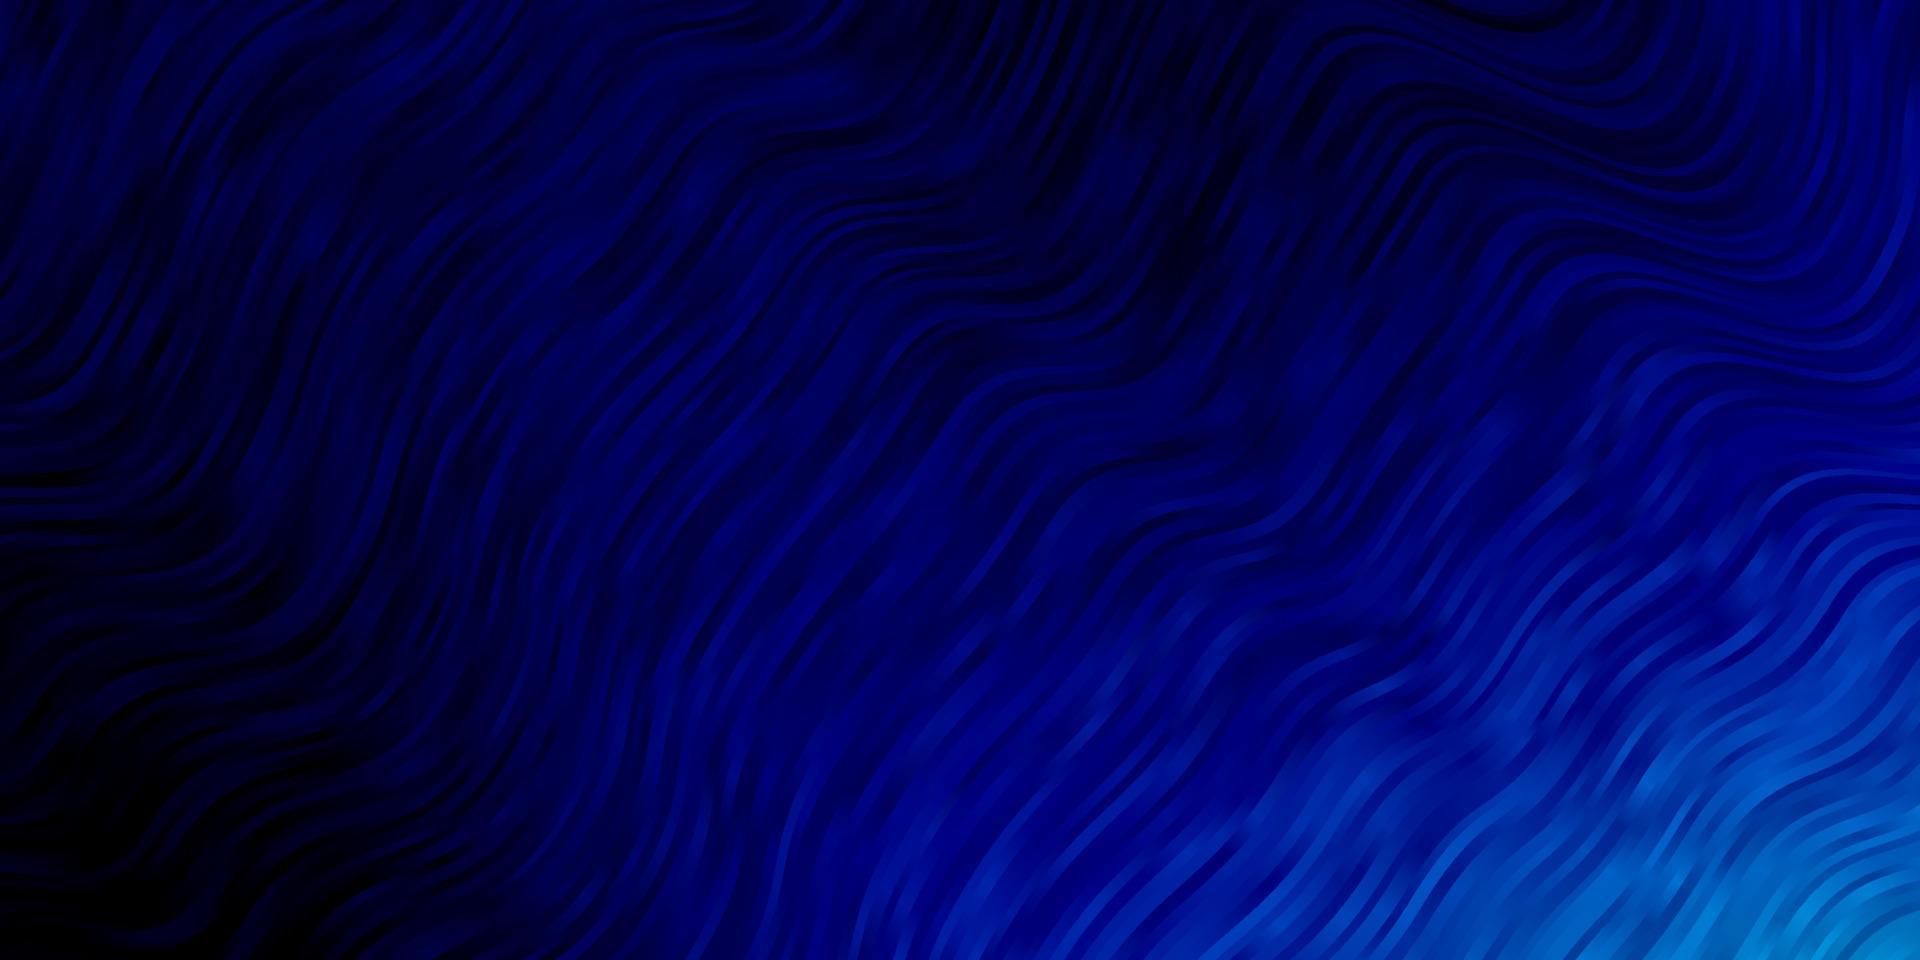 Dark BLUE vector pattern with curved lines.